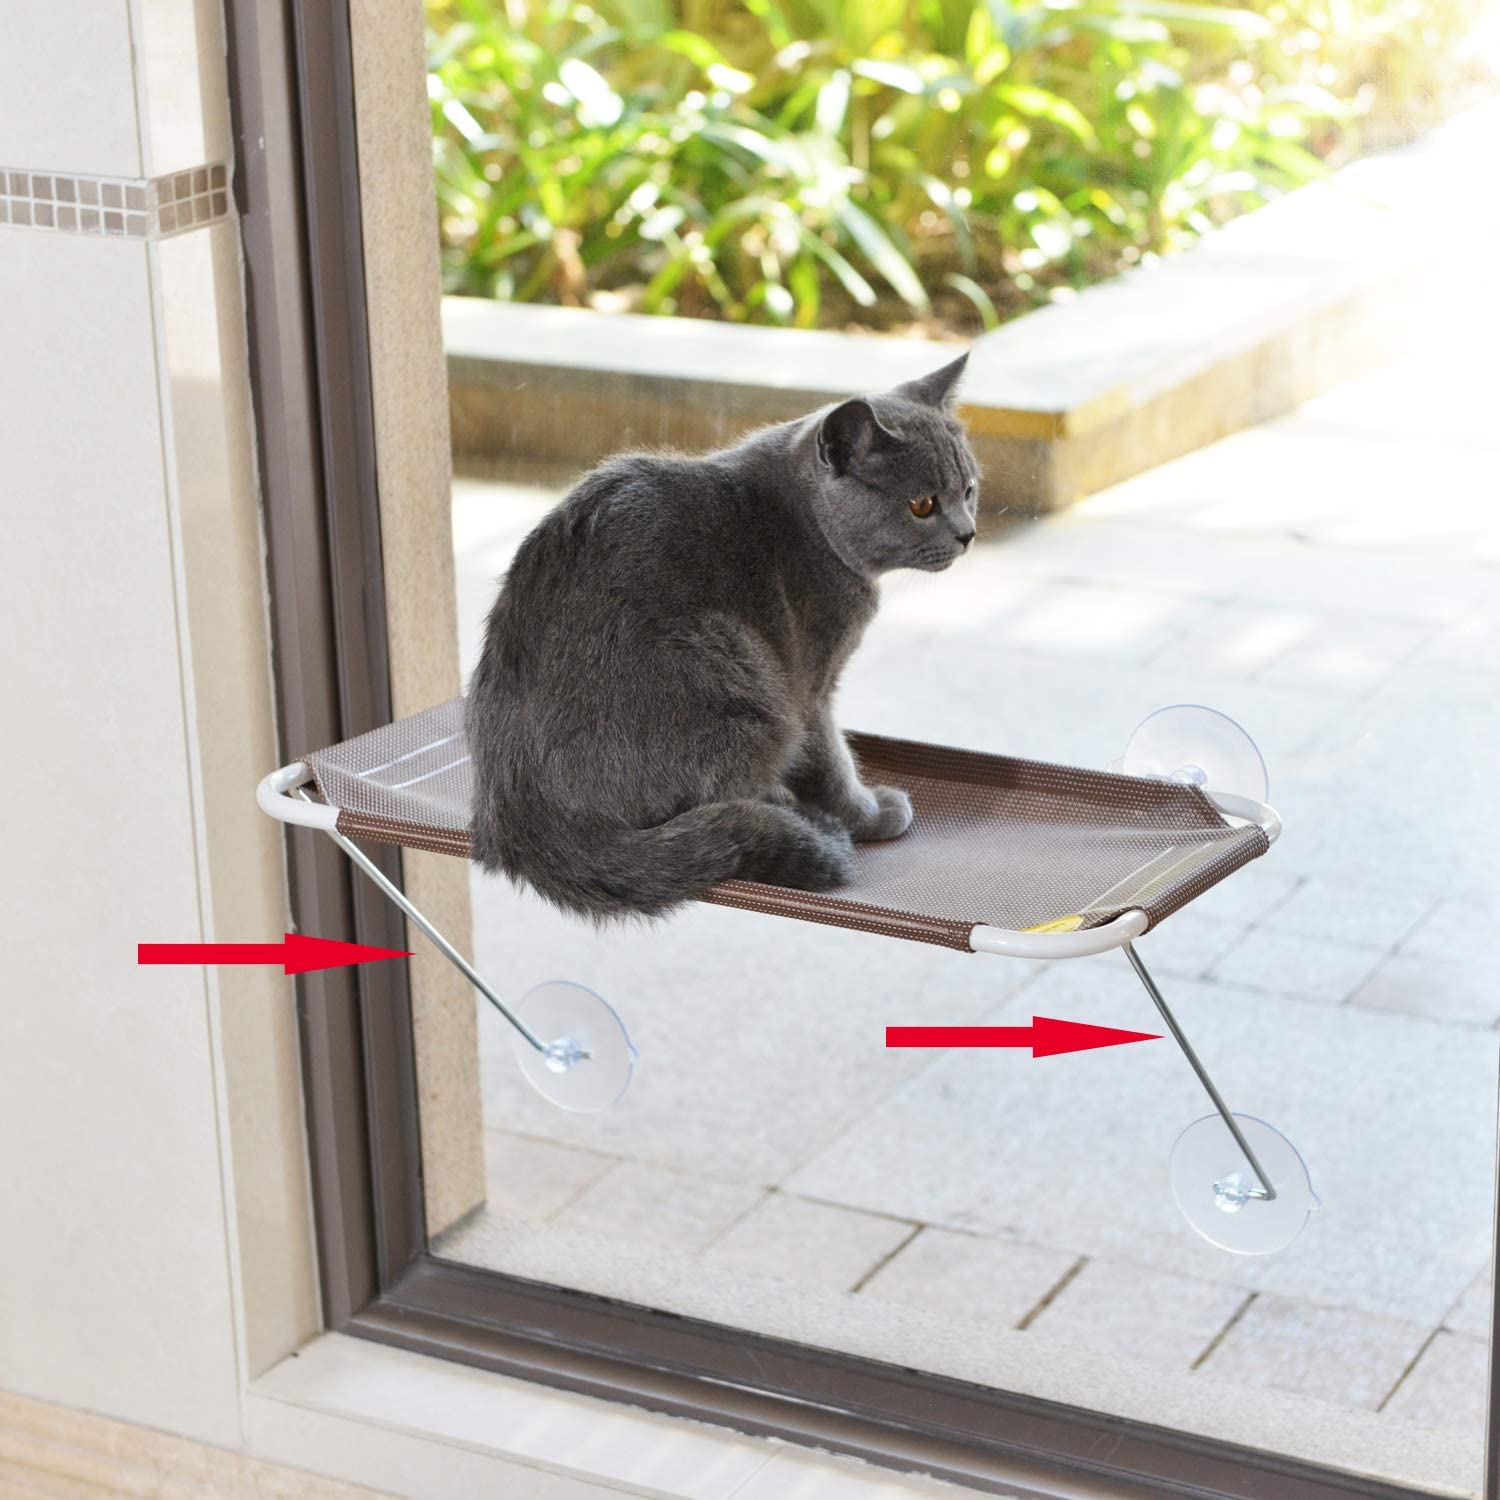 LSAIFATER All Around 360° Sunbath and Lower Support Safety Iron Cat Window Perch, Cat Hammock Window Seat for Any Cats